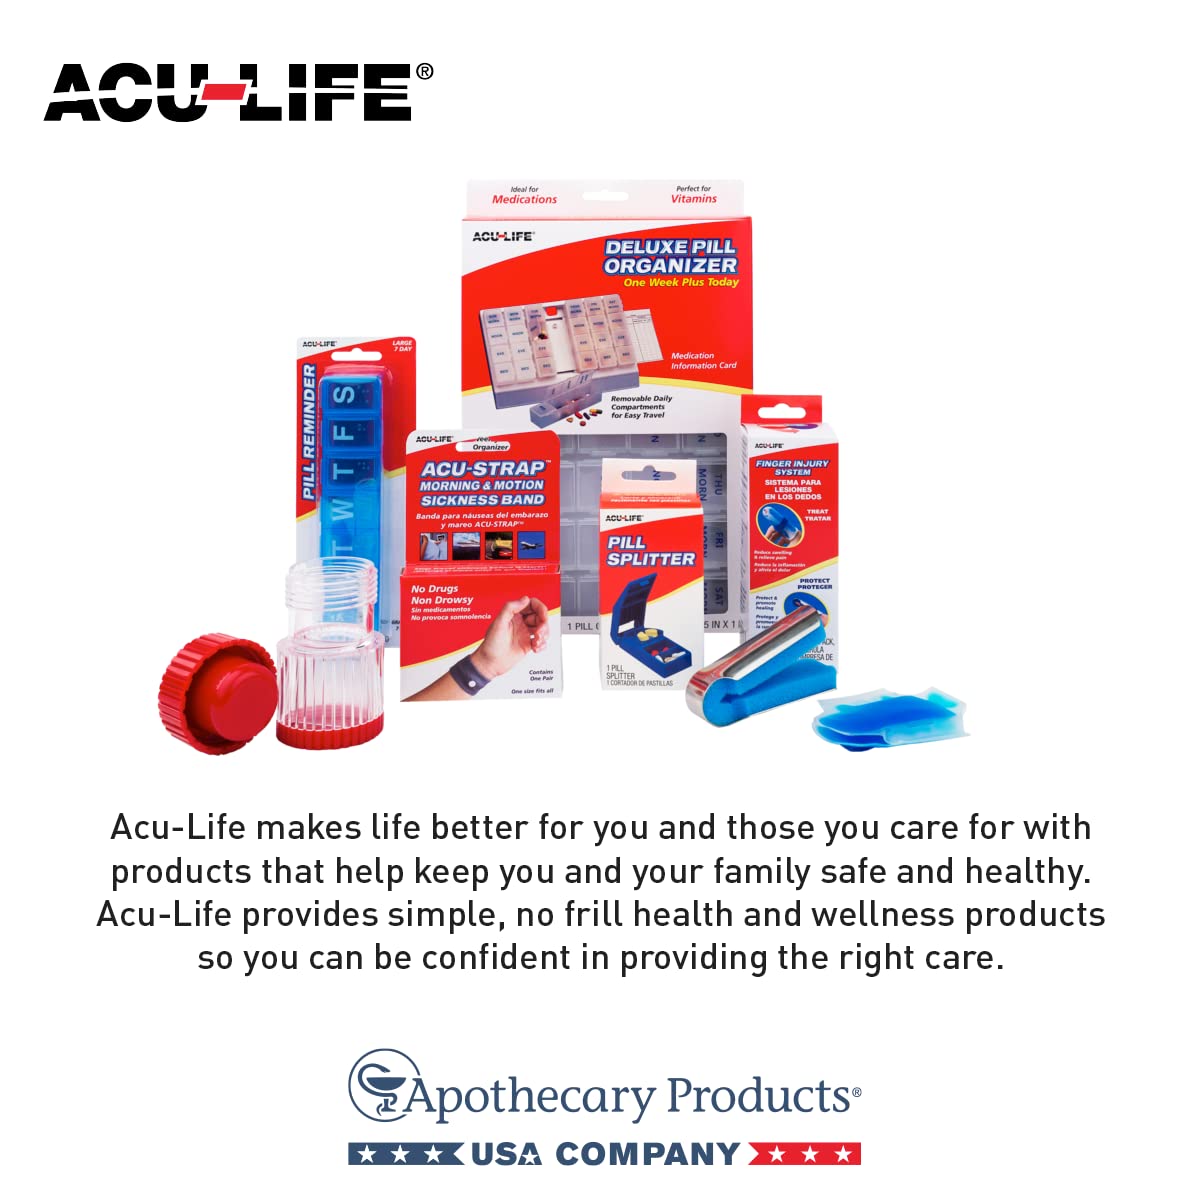 Acu-Life Ear and Ear Wax Cleaner for Humans Includes Syringe with Tri-Stream Tip and Ear Wax catching Basin